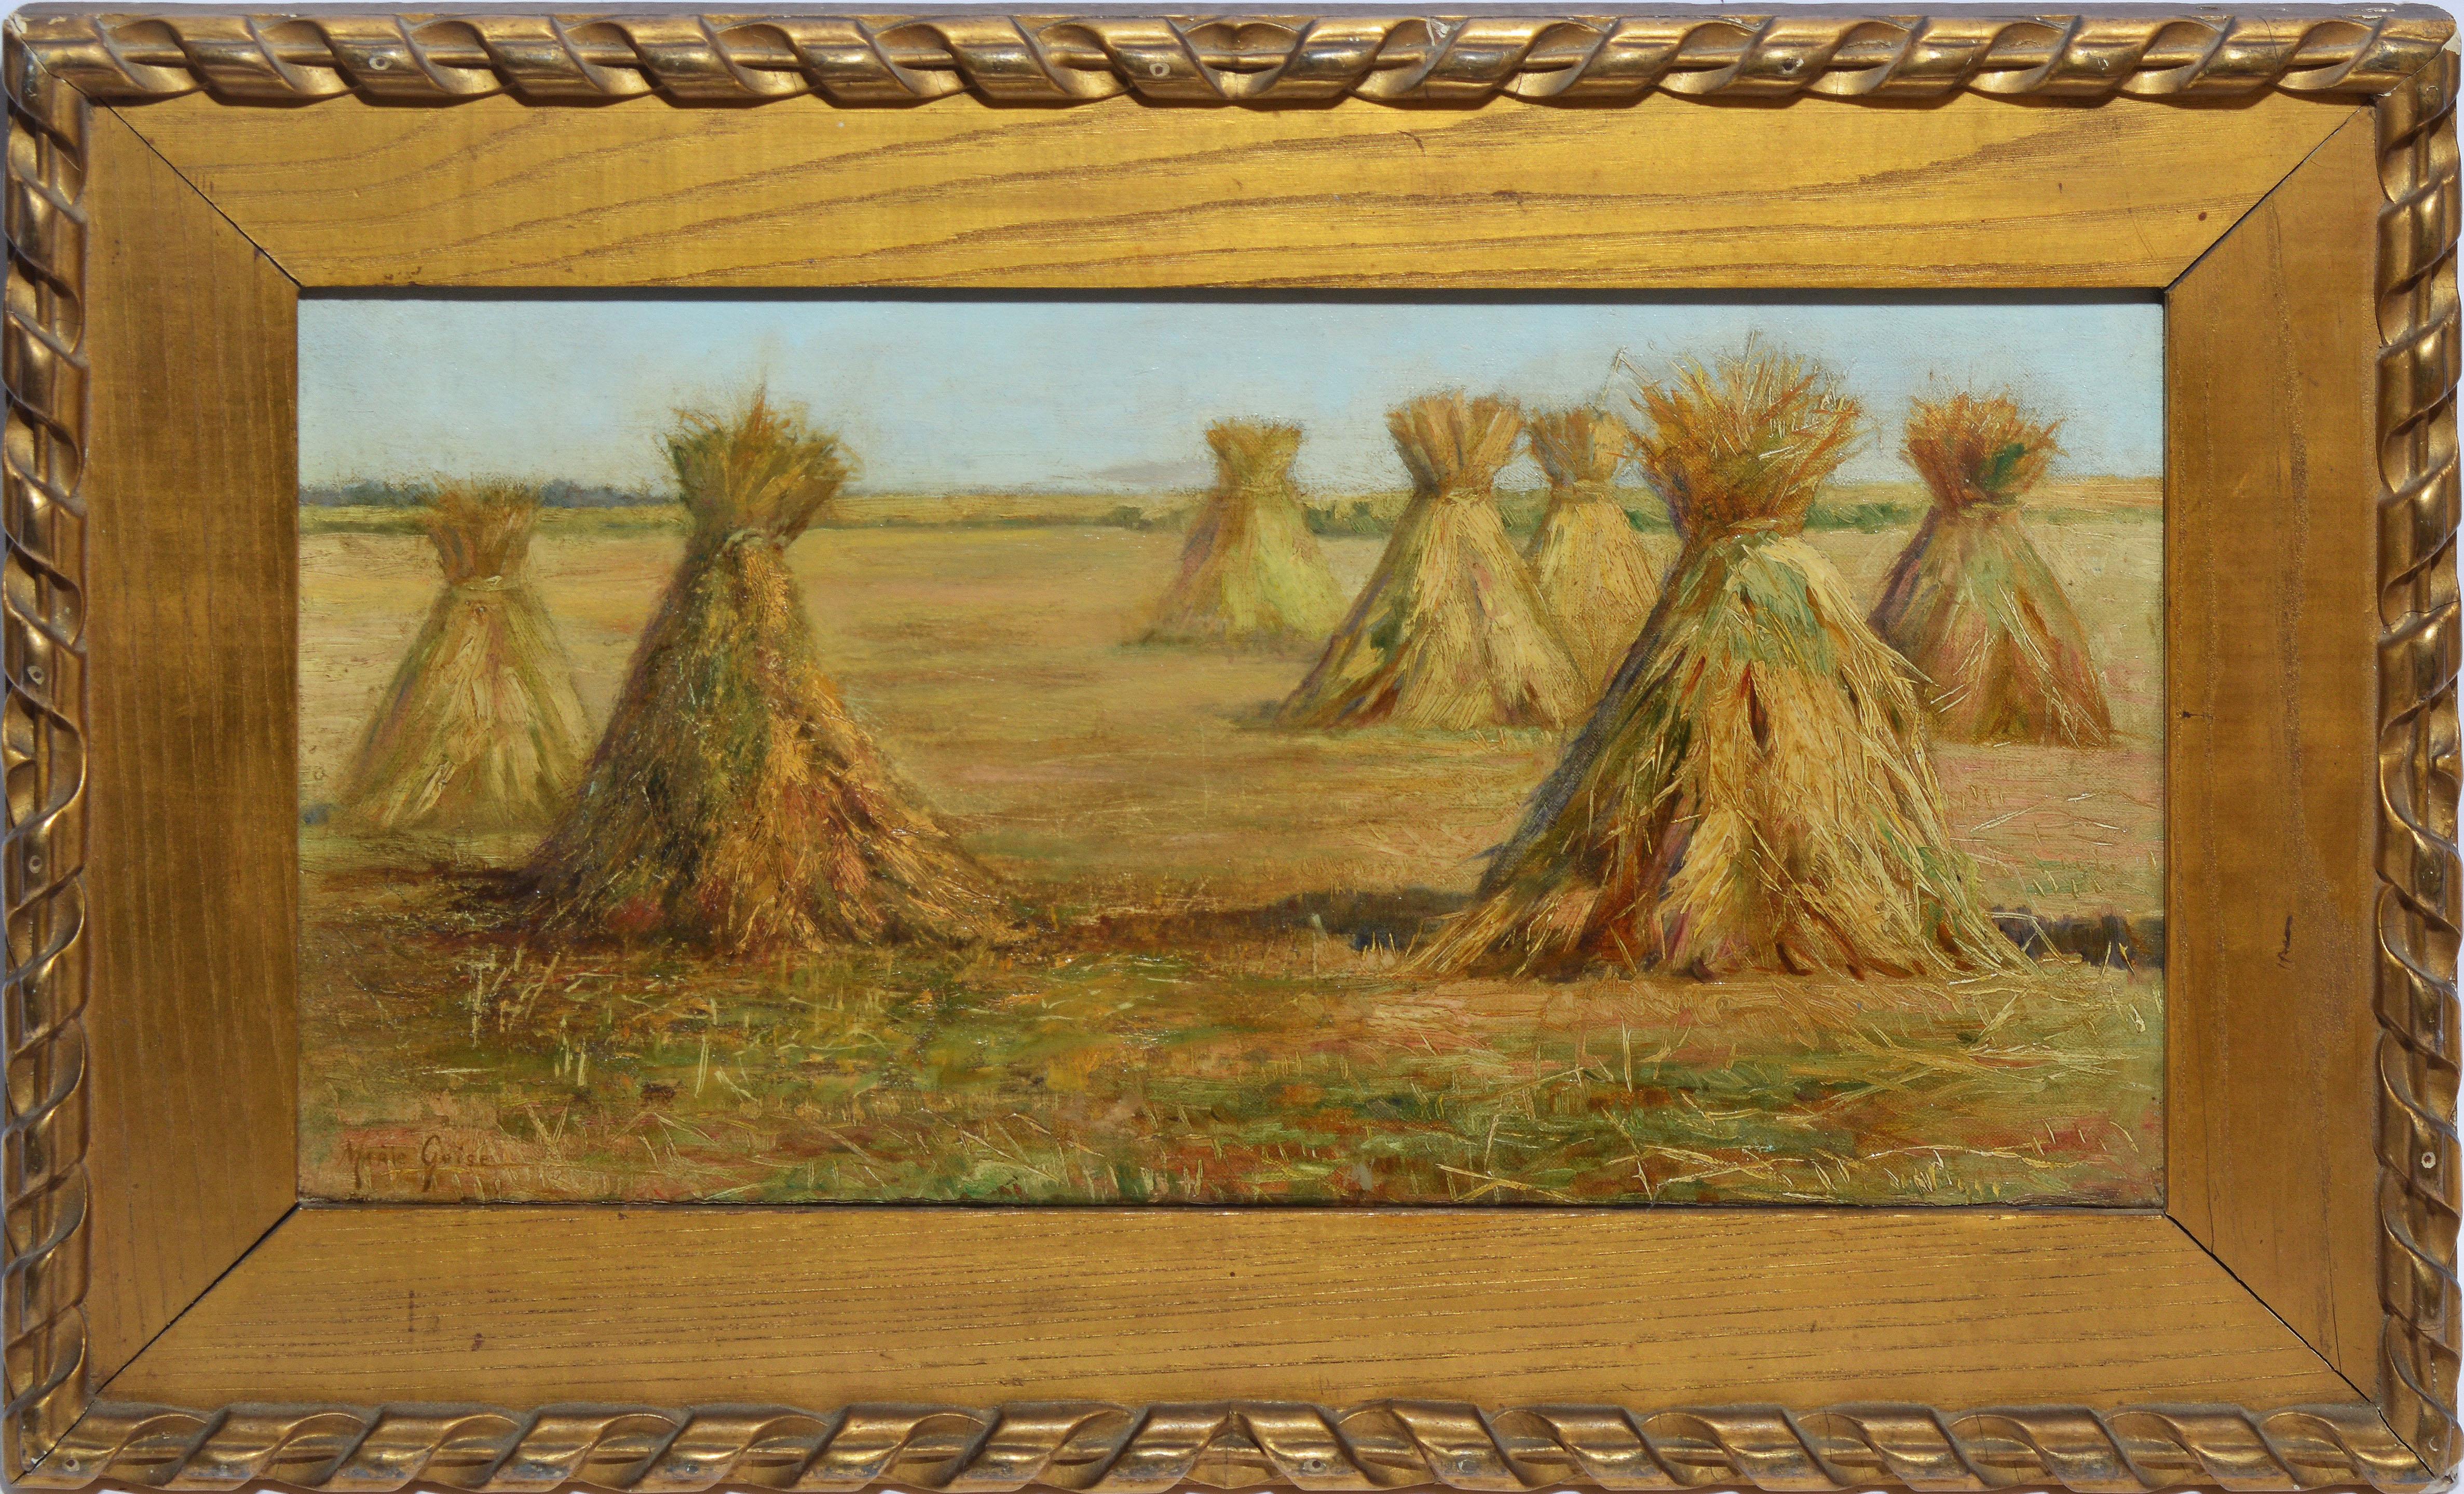 Marie H Guise Newcomb Landscape Painting - Antique American Impressionist Haystack Landscape Oil Painting by Mary Guise